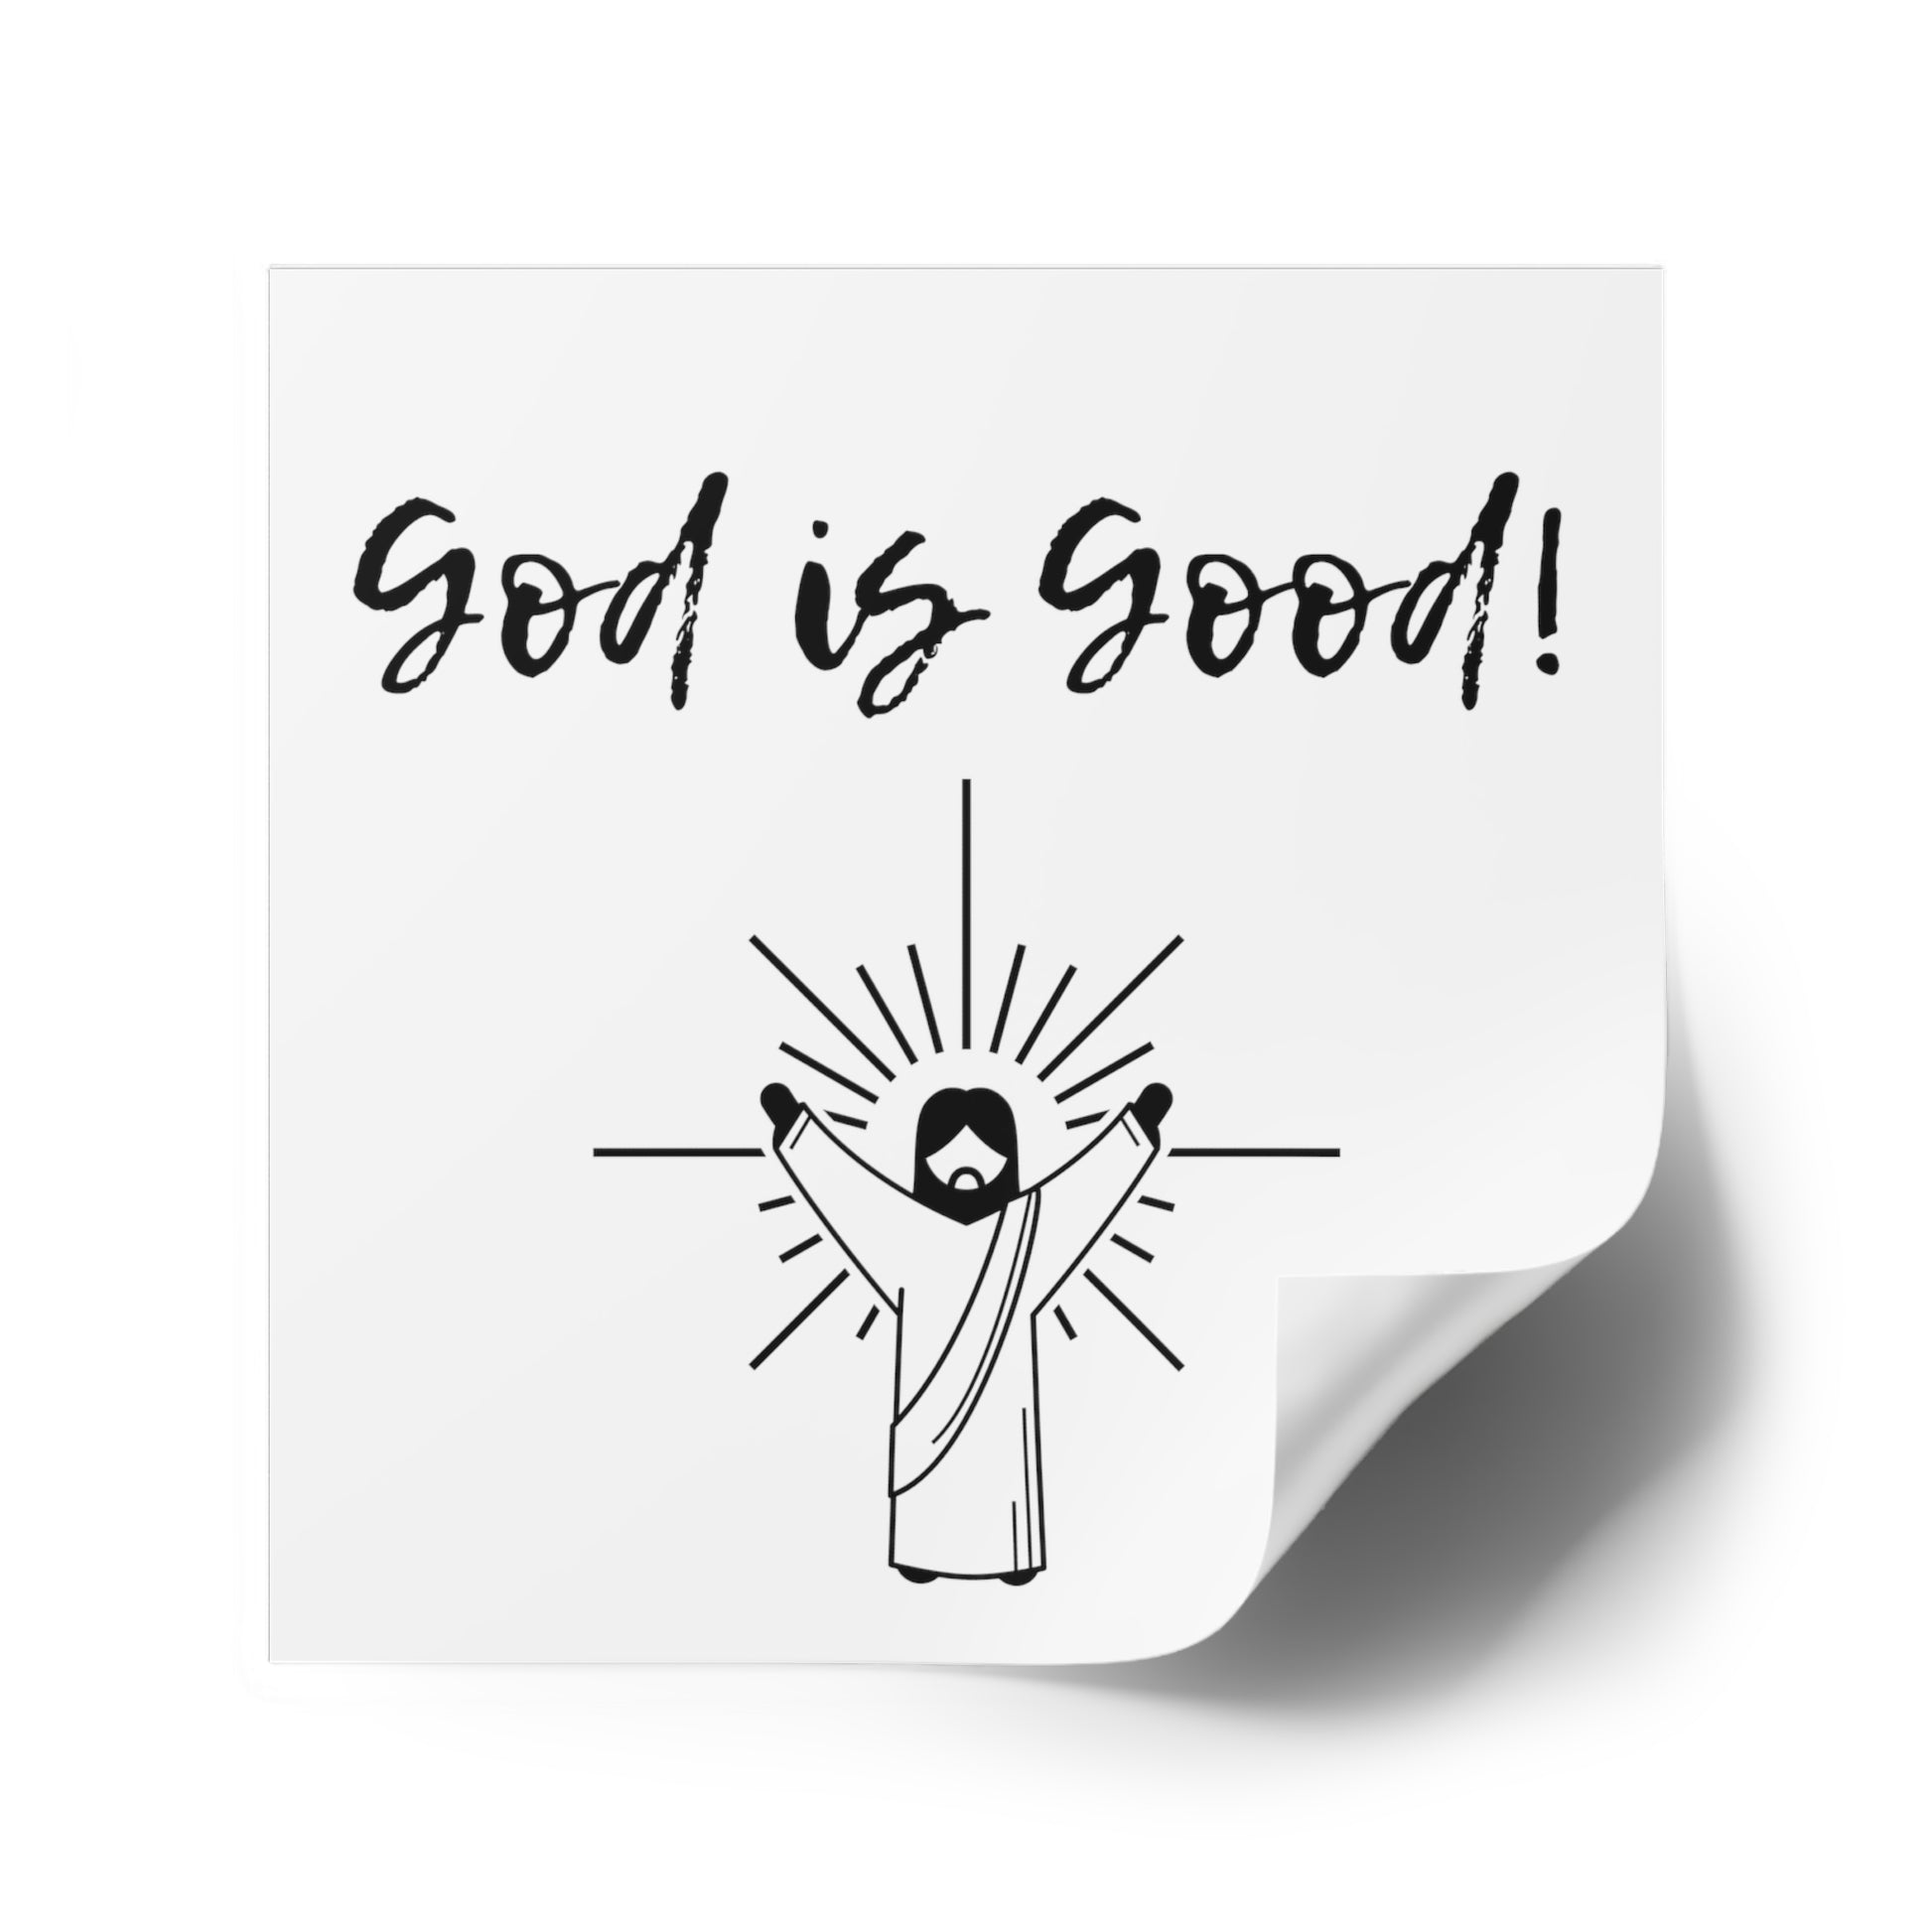 God Is Good Sticker, Christian Sticker,  Laptop, Phone, Notebook Sticker, Faith Sticker, Gift for Christian, Bible Verse, Religious Stickers - The Good Life Vibe